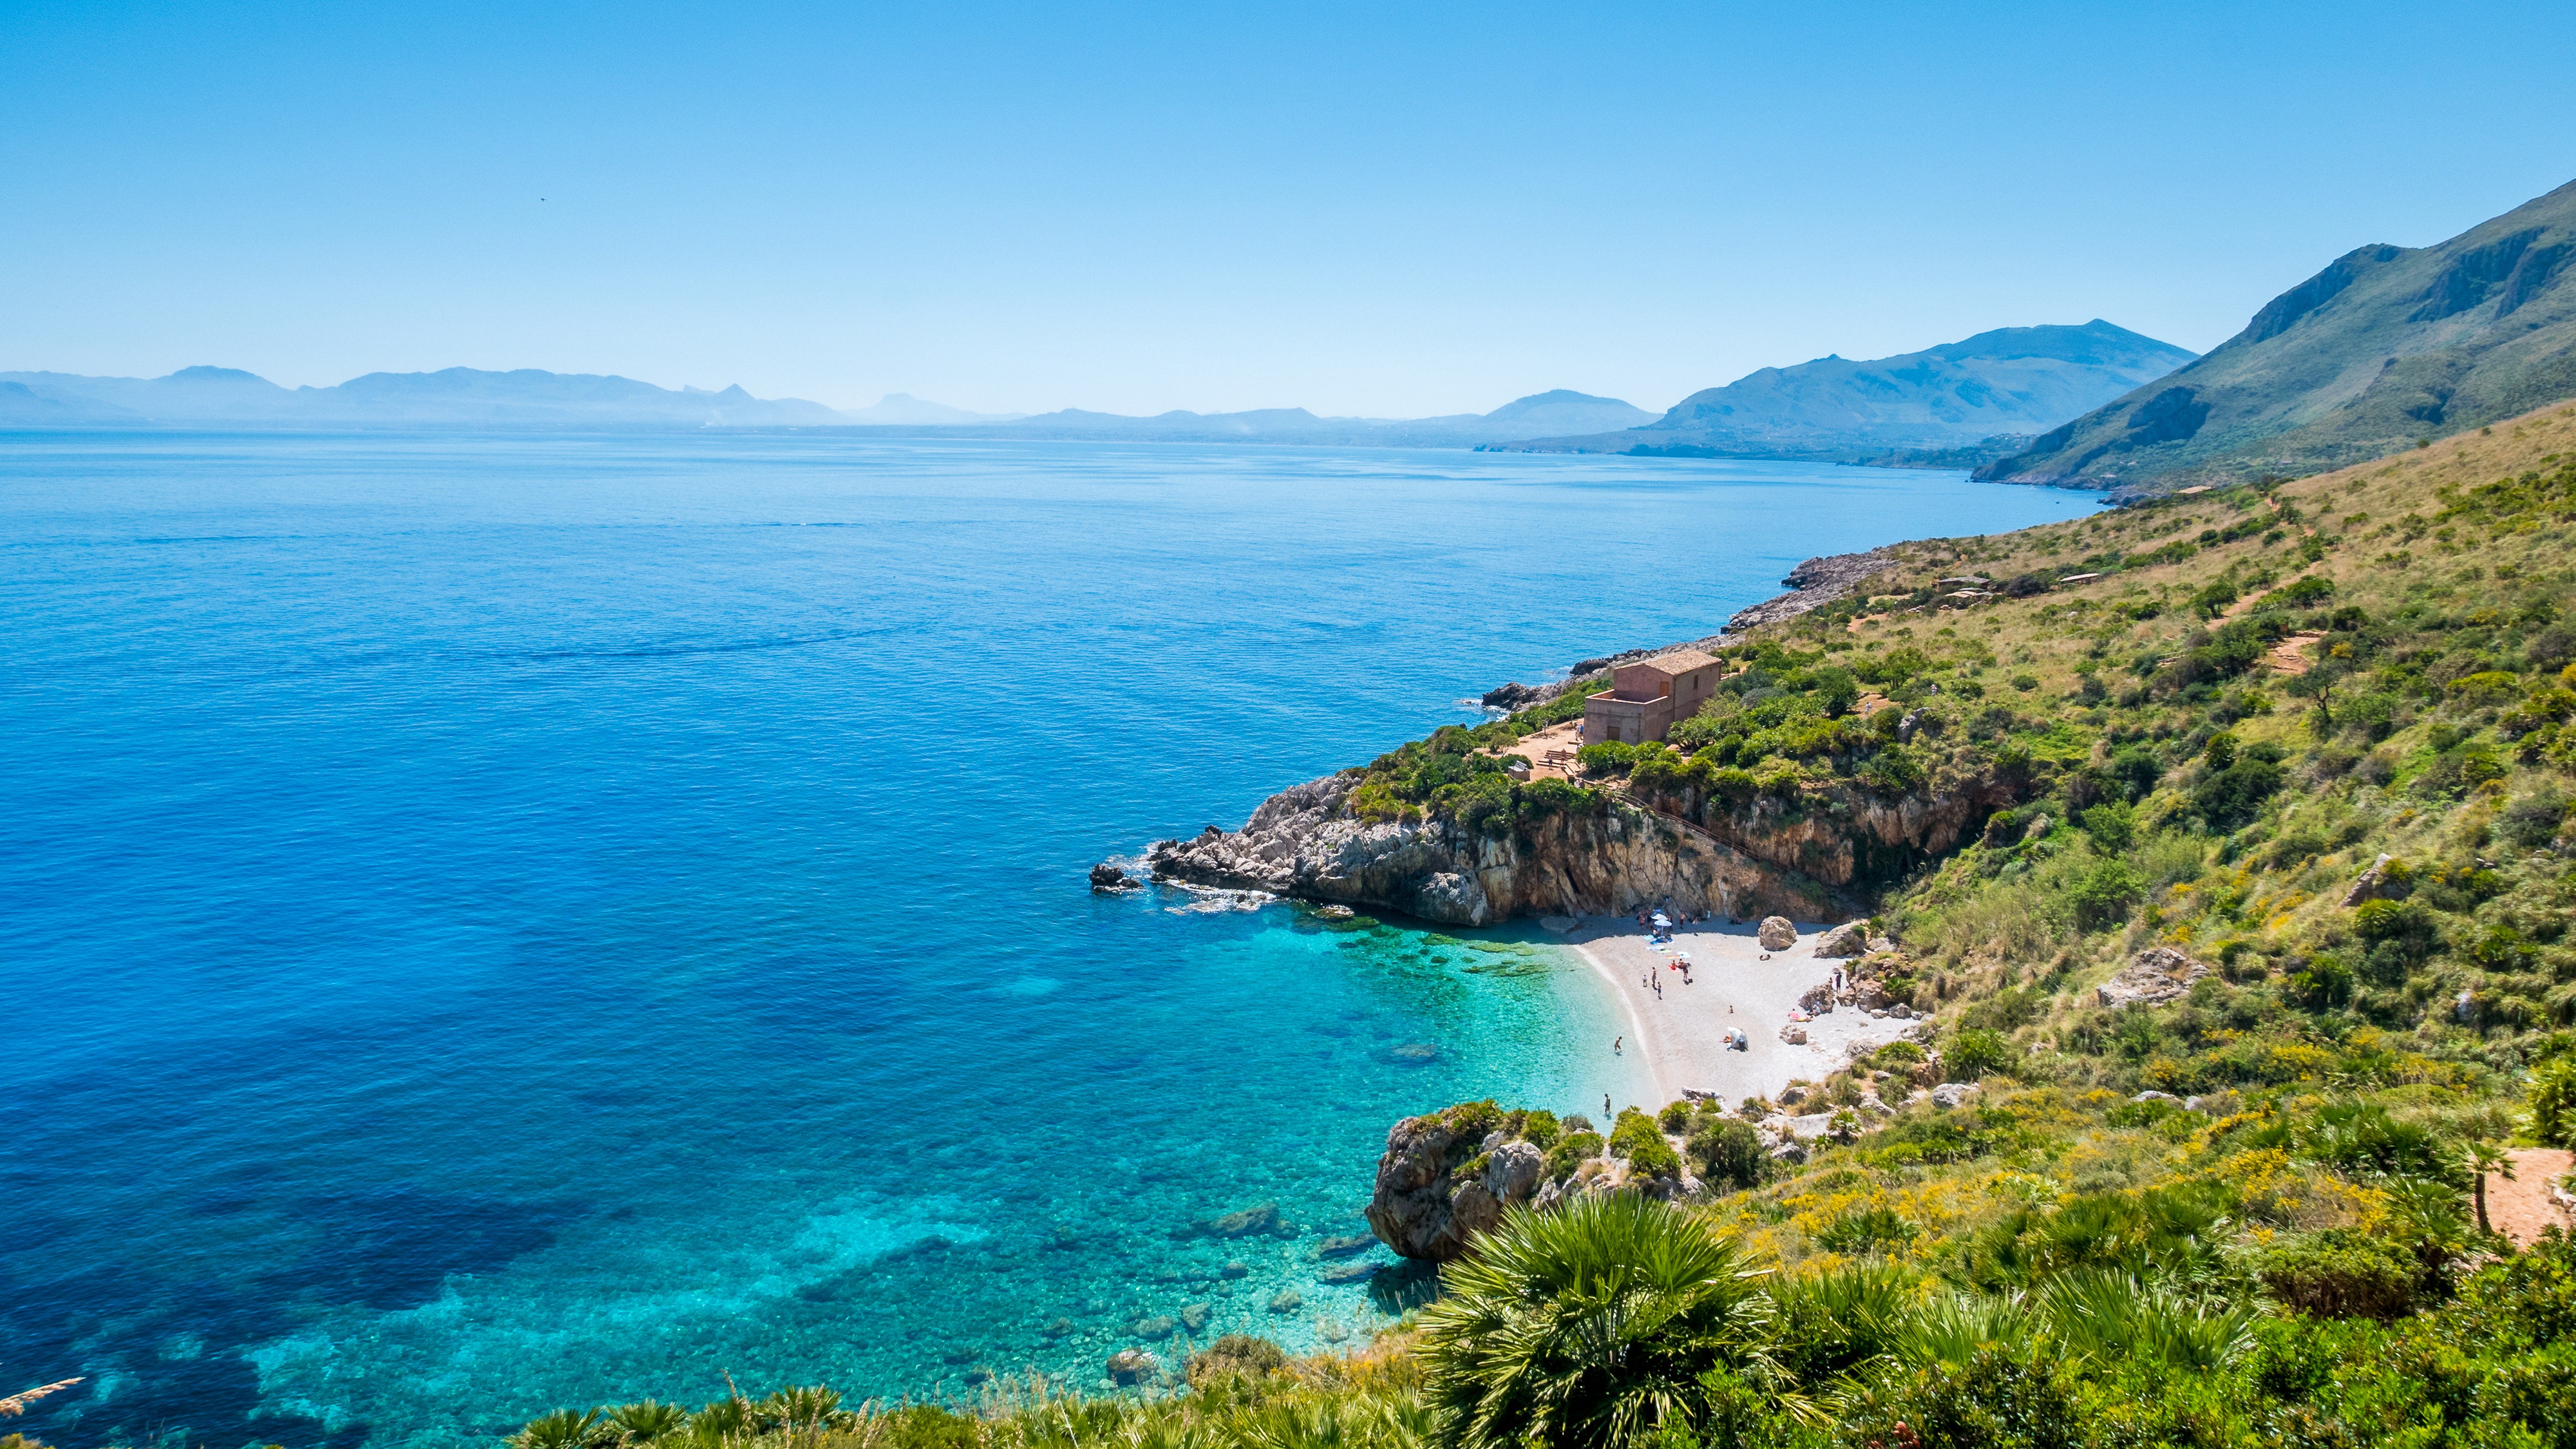 <p>Fair warning: It’s a literal hike to get to sun-soaked Cala Tonnarella, a hidden cove in the <a href="https://www.visitsicily.info/en/the-zingaro-reserve/">Zingaro Nature Reserve</a> on the Gulf of Castellammare. The beach is inaccessible by road, and it takes a little over an hour to get there on foot from the reserve’s southern car park. It’s worth the effort: Upon arrival, you’ll be met with a secluded and uncrowded paradise as a reward.</p> <p>For comfortable proximity to both the beach and the nature reserve, book a room at the nearby <a href="https://cna.st/affiliate-link/8UAFzxJzvSuamRyasvgAZohqCbtynutgnt2tbTMSDpD7LgaWkh3GDUq3Ka7AfvAokYArLtAFwp4d4ydtmSVBrc52S8dD2tKsW8HfLdHgbhKmUMXj61Ycrc1ruxdU2WRd7YRcmd64WQhWb4hcodrae8DZGgGCWQXJKHBPjQw3CSbj3FC7bsv" rel="sponsored">Baglio La Porta by Geocharme</a>. From this hotel, it’s still an hour’s hike to the northern entrance of the park (and a 15-minute walk from there to the beach), but checking in means you won’t have to deal with finding a parking spot. Driving to the environs of Zingaro just takes an hour from <a href="https://www.cntraveler.com/story/why-palermo-italy-inspires-our-obsessive-devotion?mbid=synd_msn_rss&utm_source=msn&utm_medium=syndication">Palermo</a>.</p><p>Sign up to receive the latest news, expert tips, and inspiration on all things travel</p><a href="https://www.cntraveler.com/newsletter/the-daily?sourceCode=msnsend">Inspire Me</a>